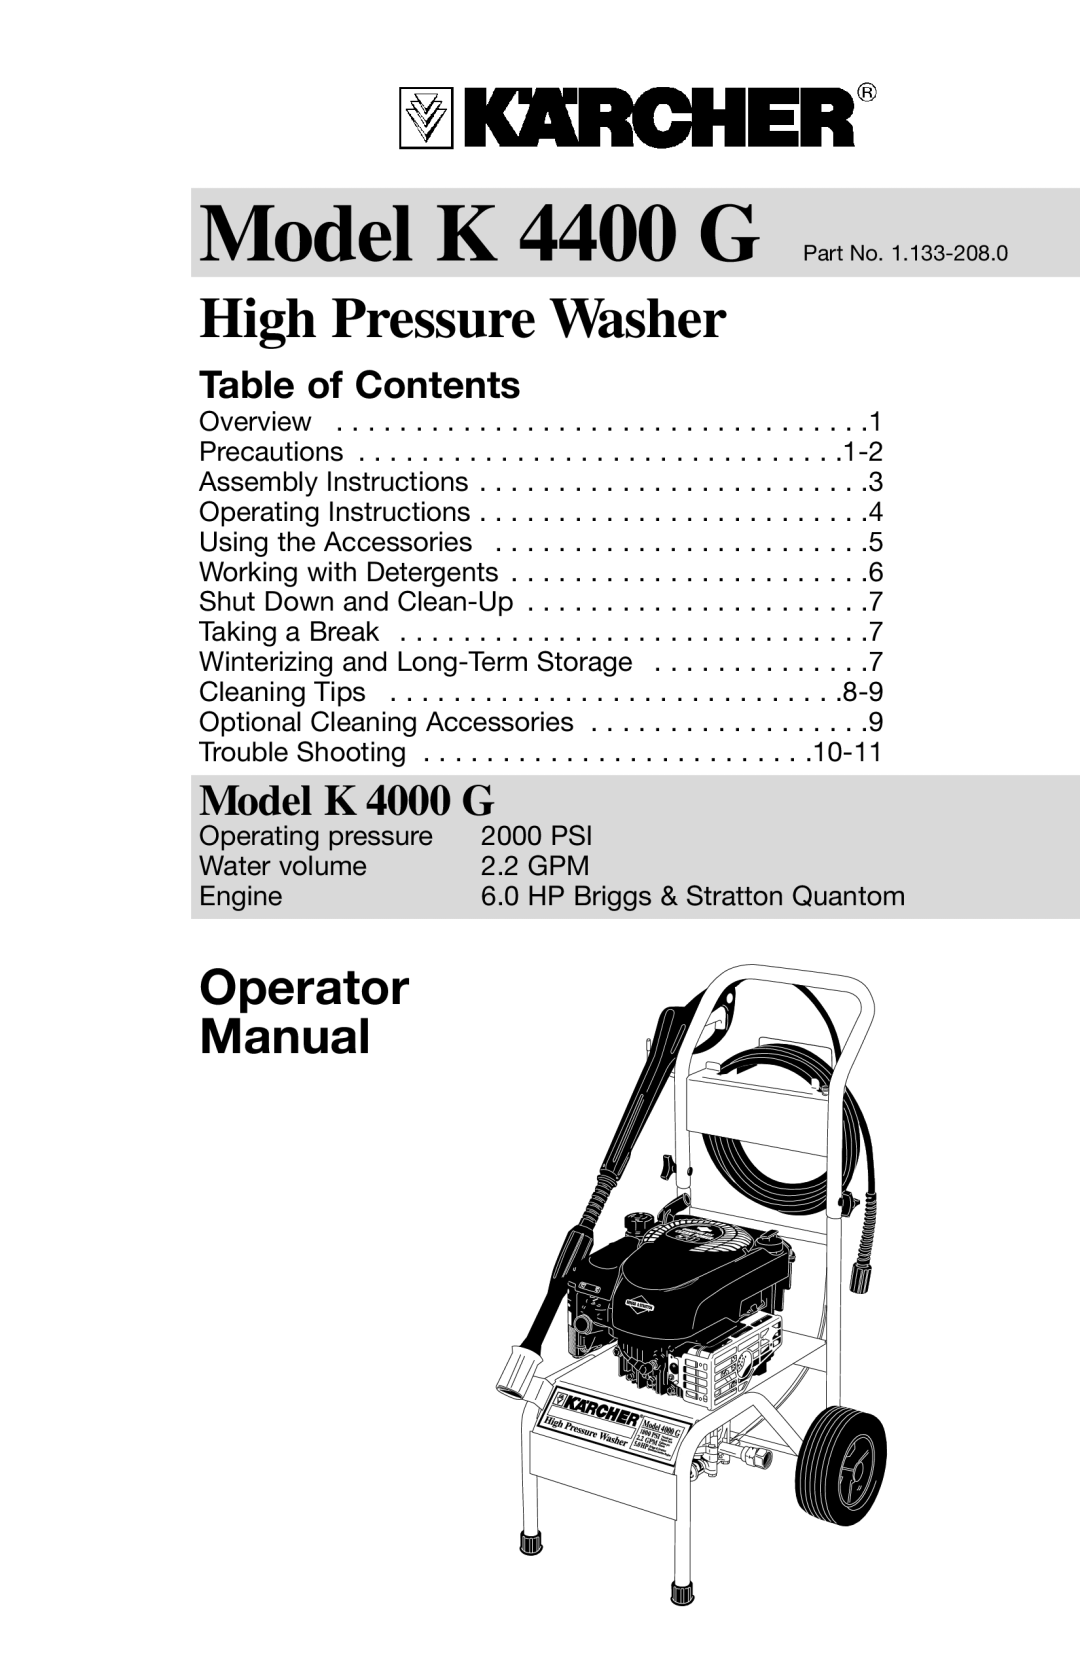 Karcher K4400G operating instructions Operator Manual, High Pressure Washer, Model K 4000 G, Table of Contents 